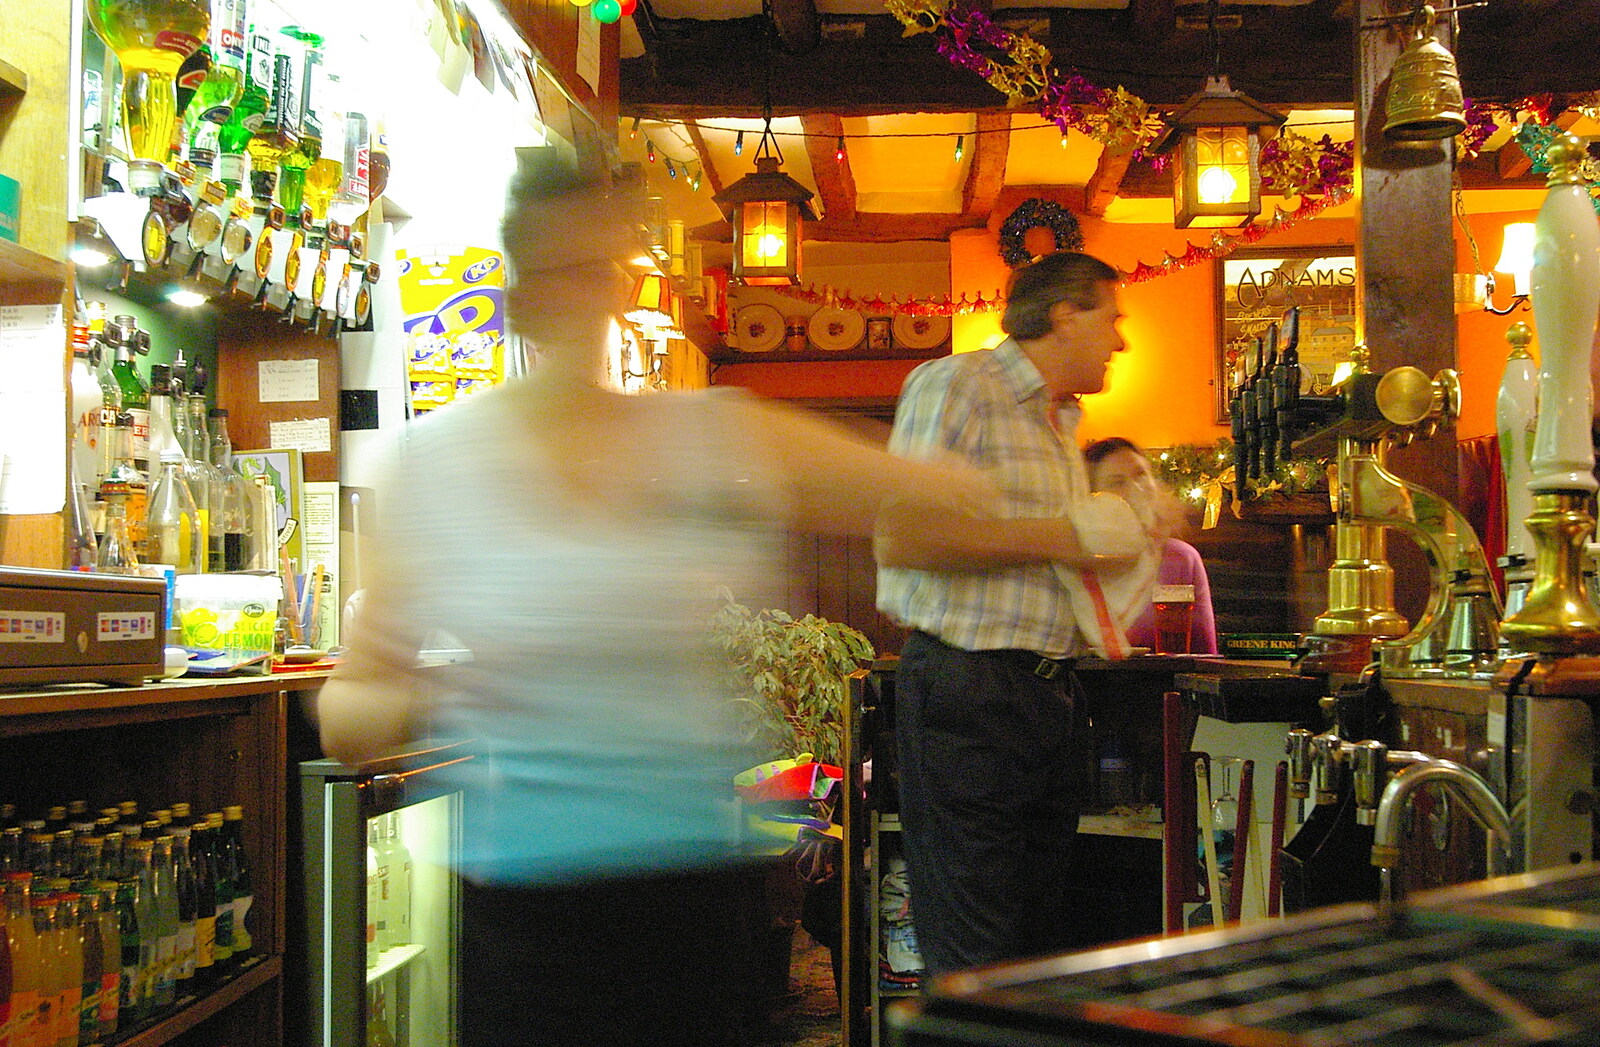 Sylvia is a blur of action behind the bar from Pre-Christmas Roundup: Wigs, Beers and Kebabs, Diss, Norfolk - 24th December 2005